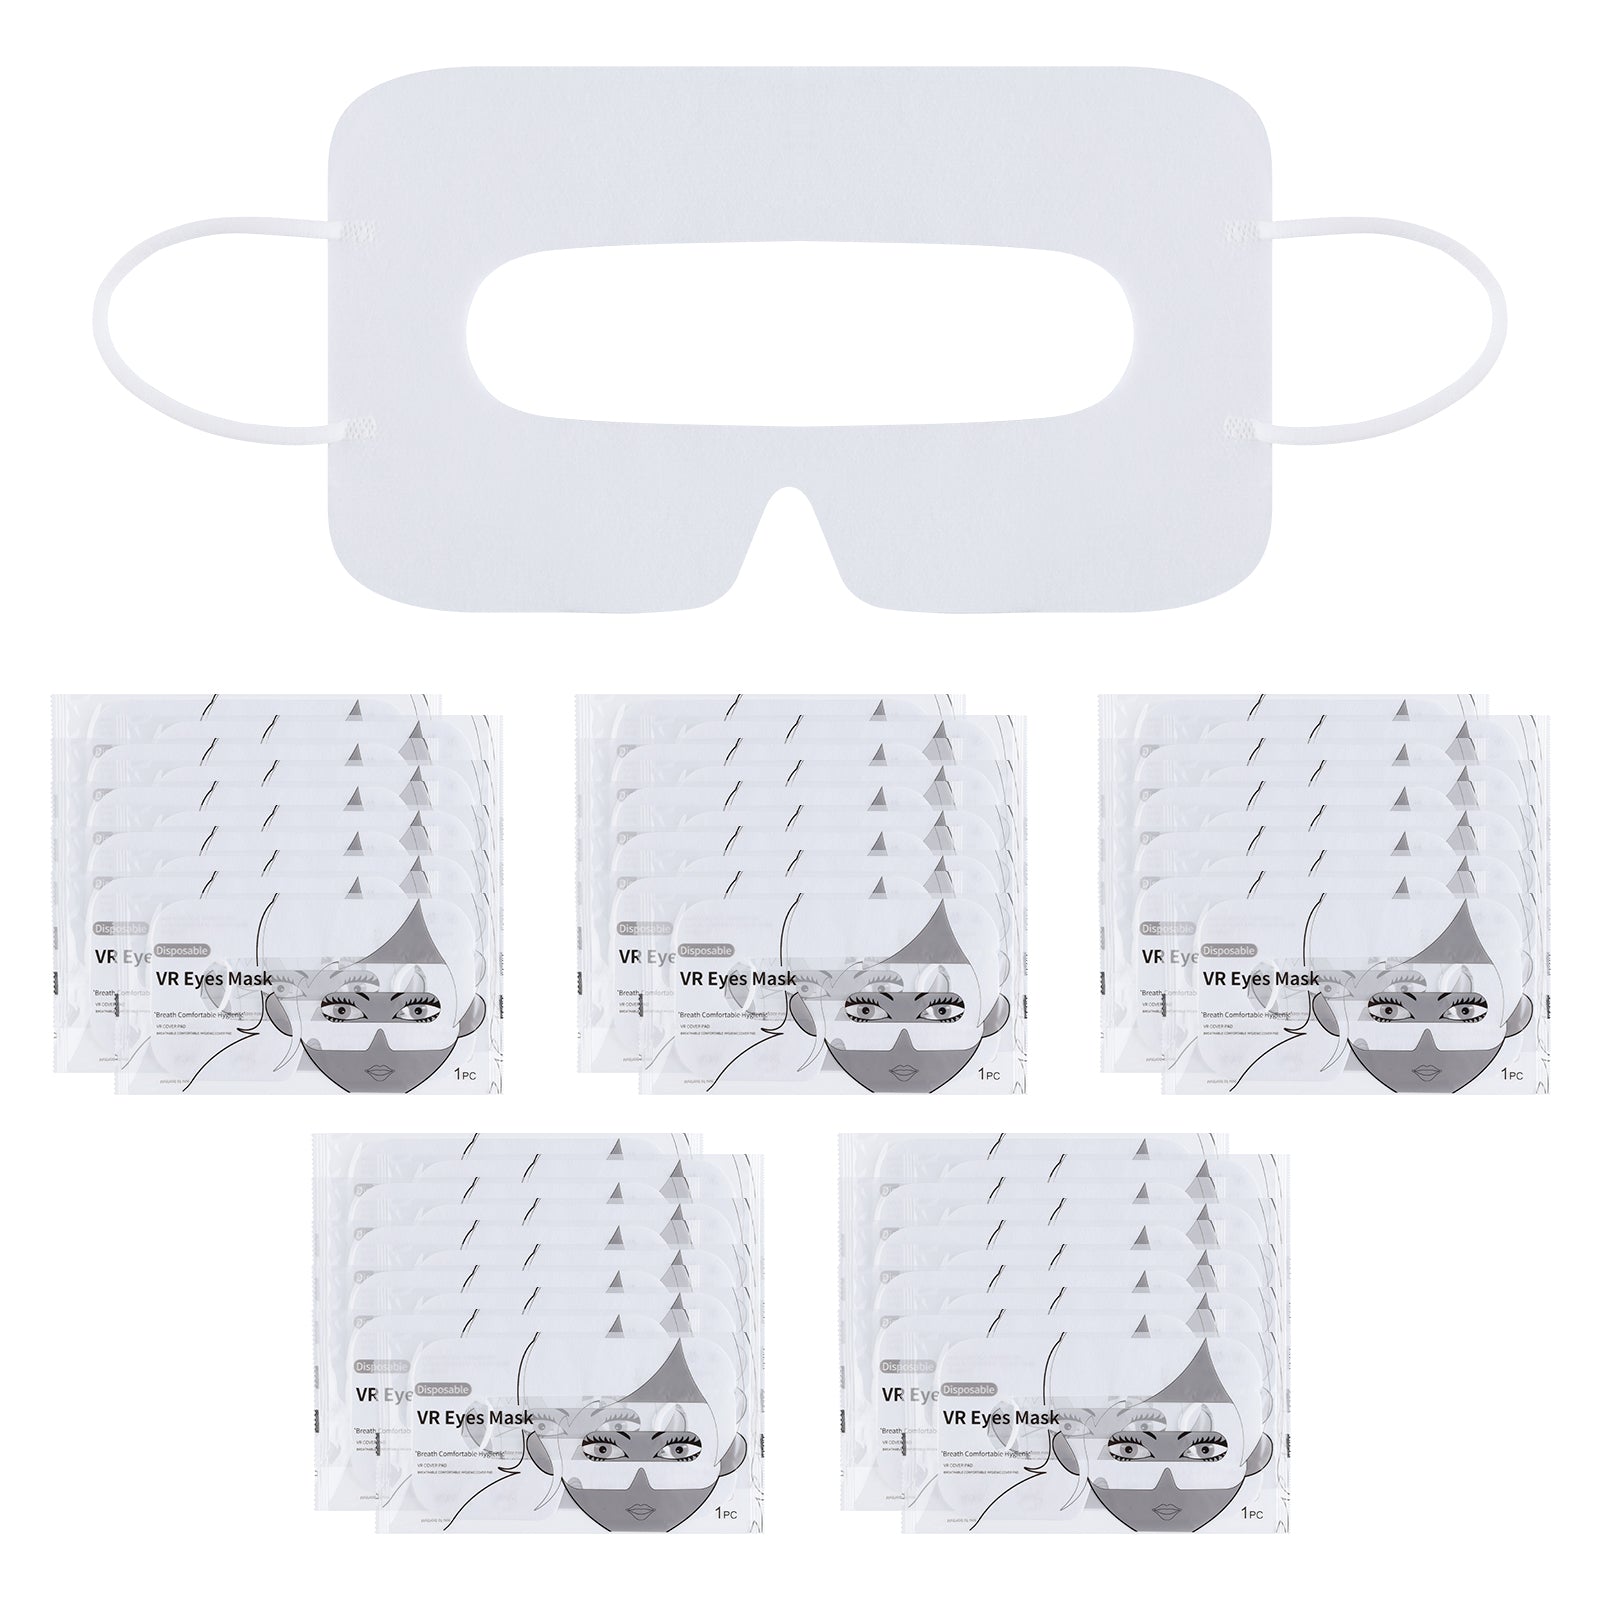 VR Face Cover White Disposable Sanitary VR Mask Pads Covers--10PCS IW